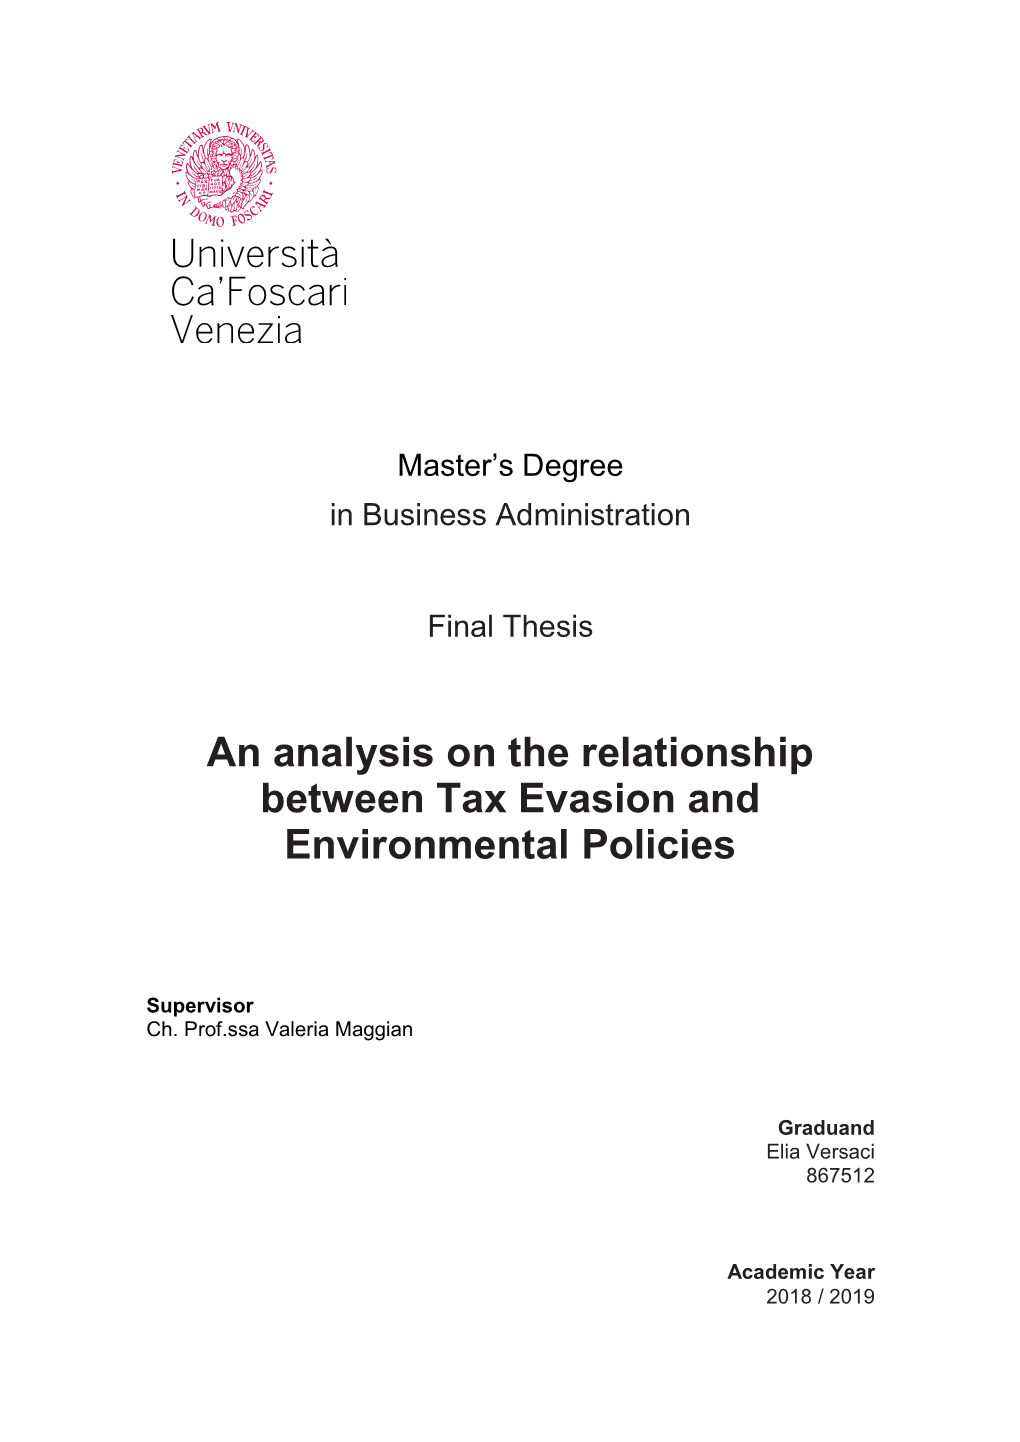 An Analysis on the Relationship Between Tax Evasion and Environmental Policies